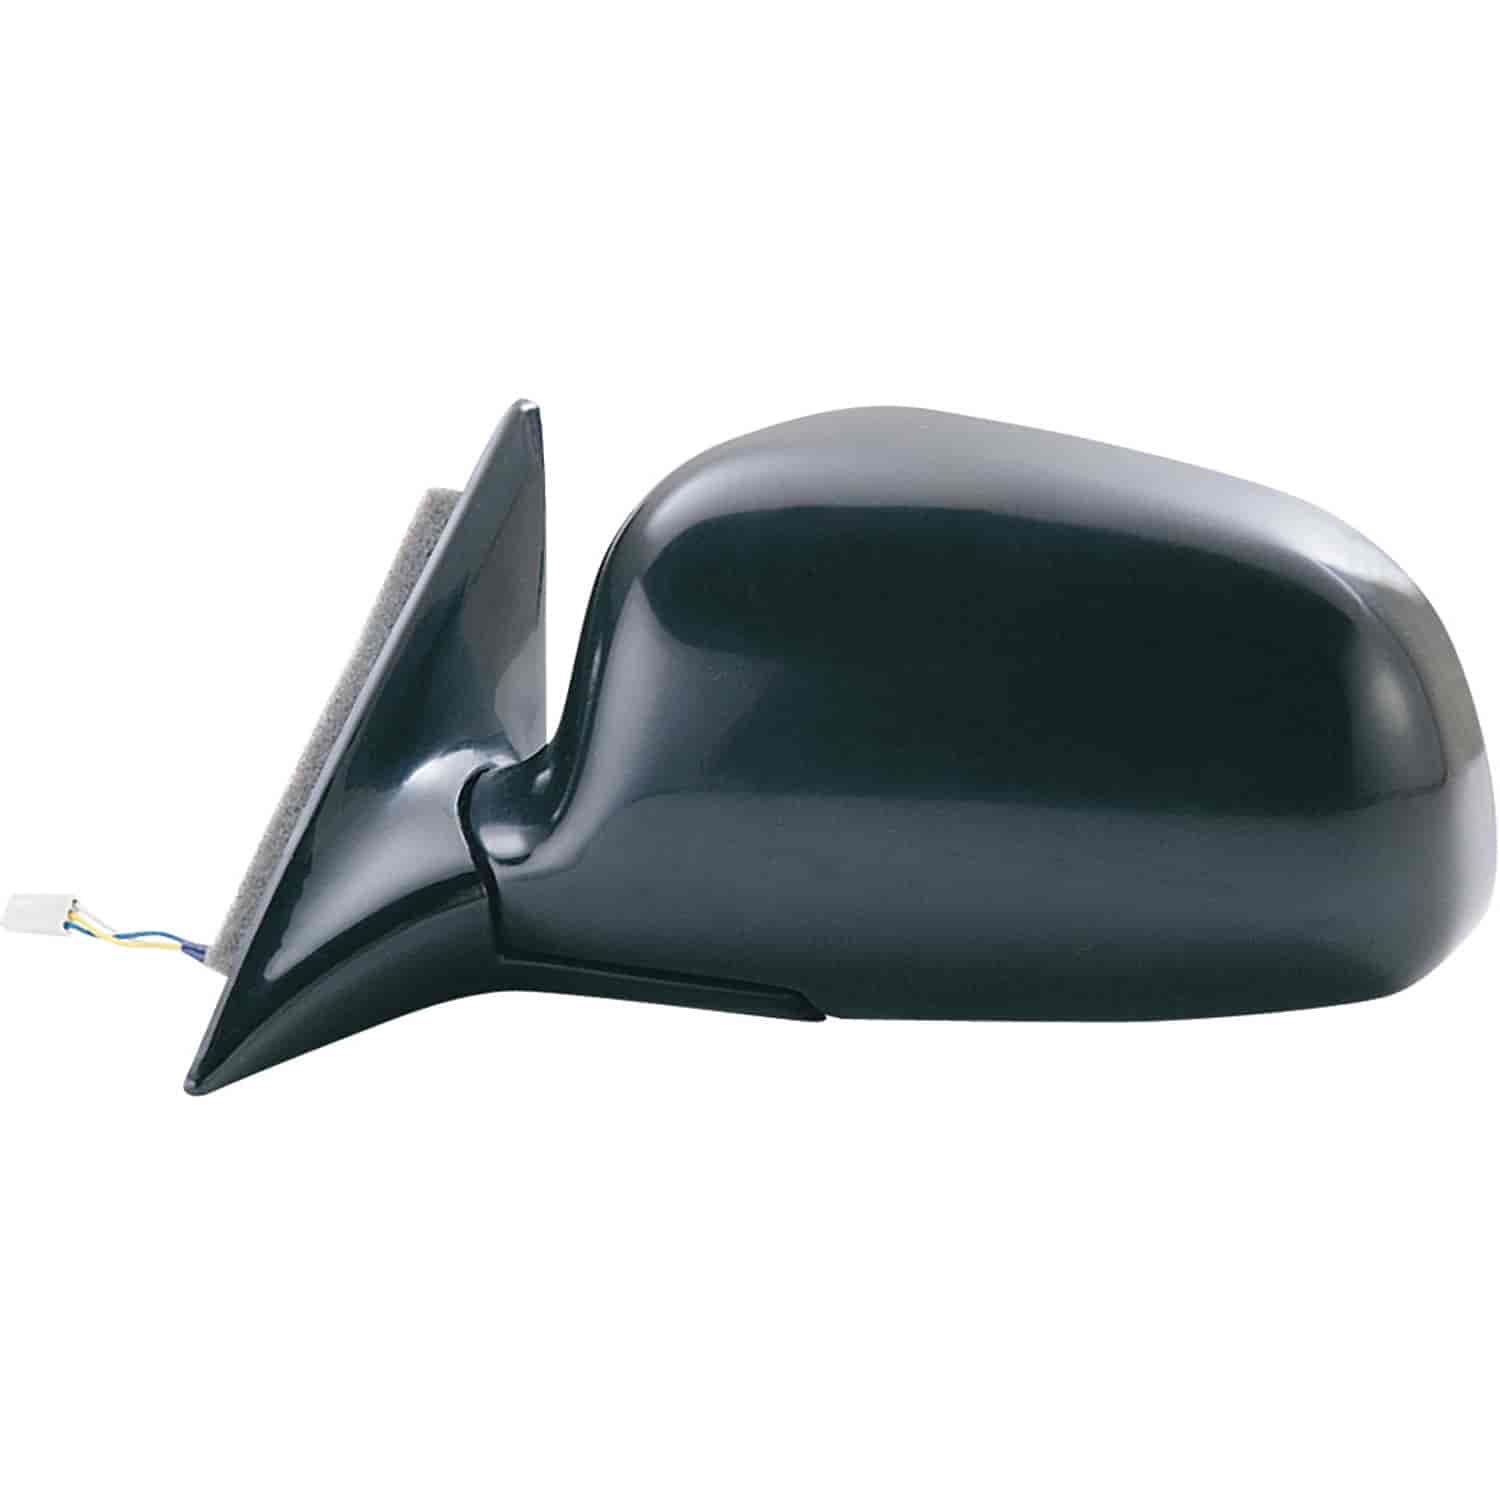 OEM Style Replacement mirror for 93-96 Mitsubishi Mirage Sedan 4 door driver side mirror tested to f